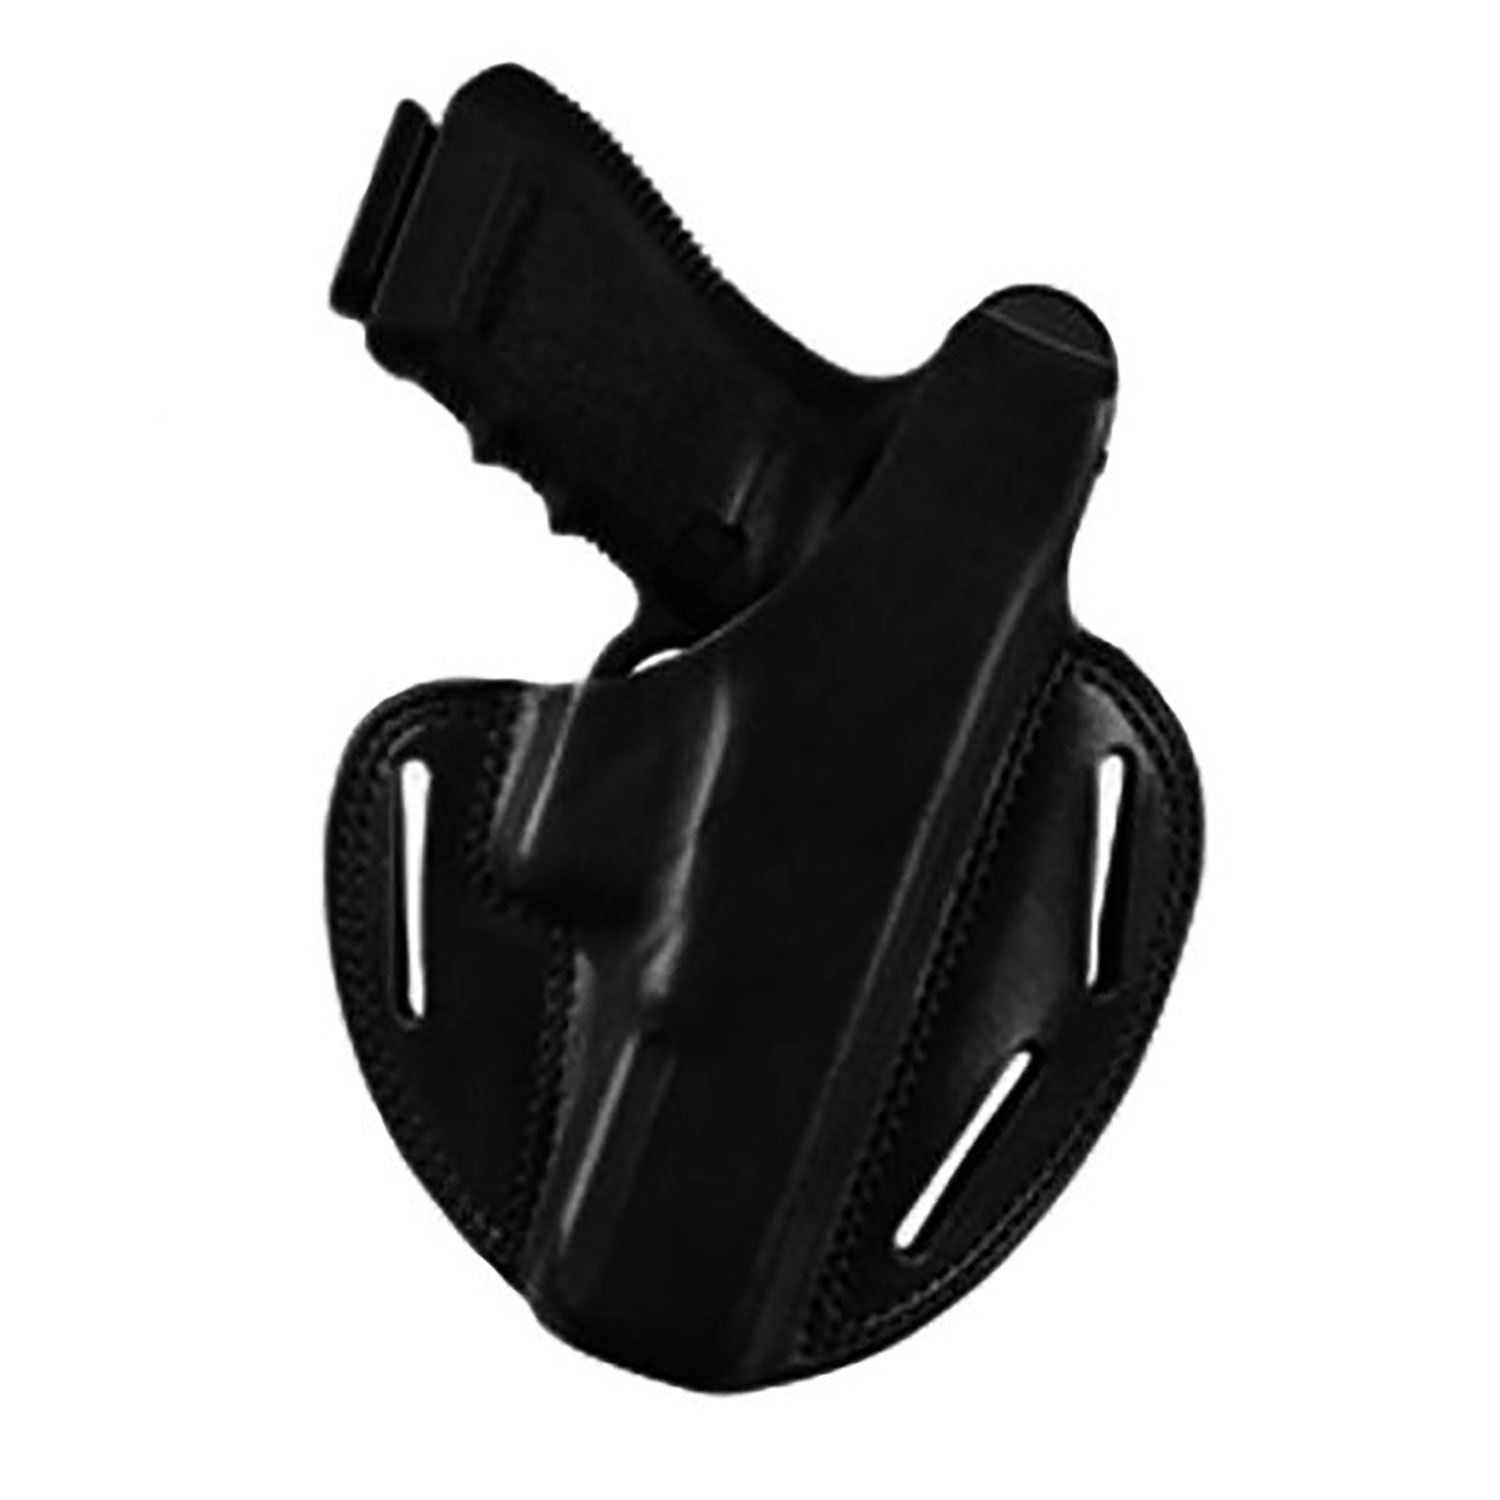 Bianchi Holster Fit Chart